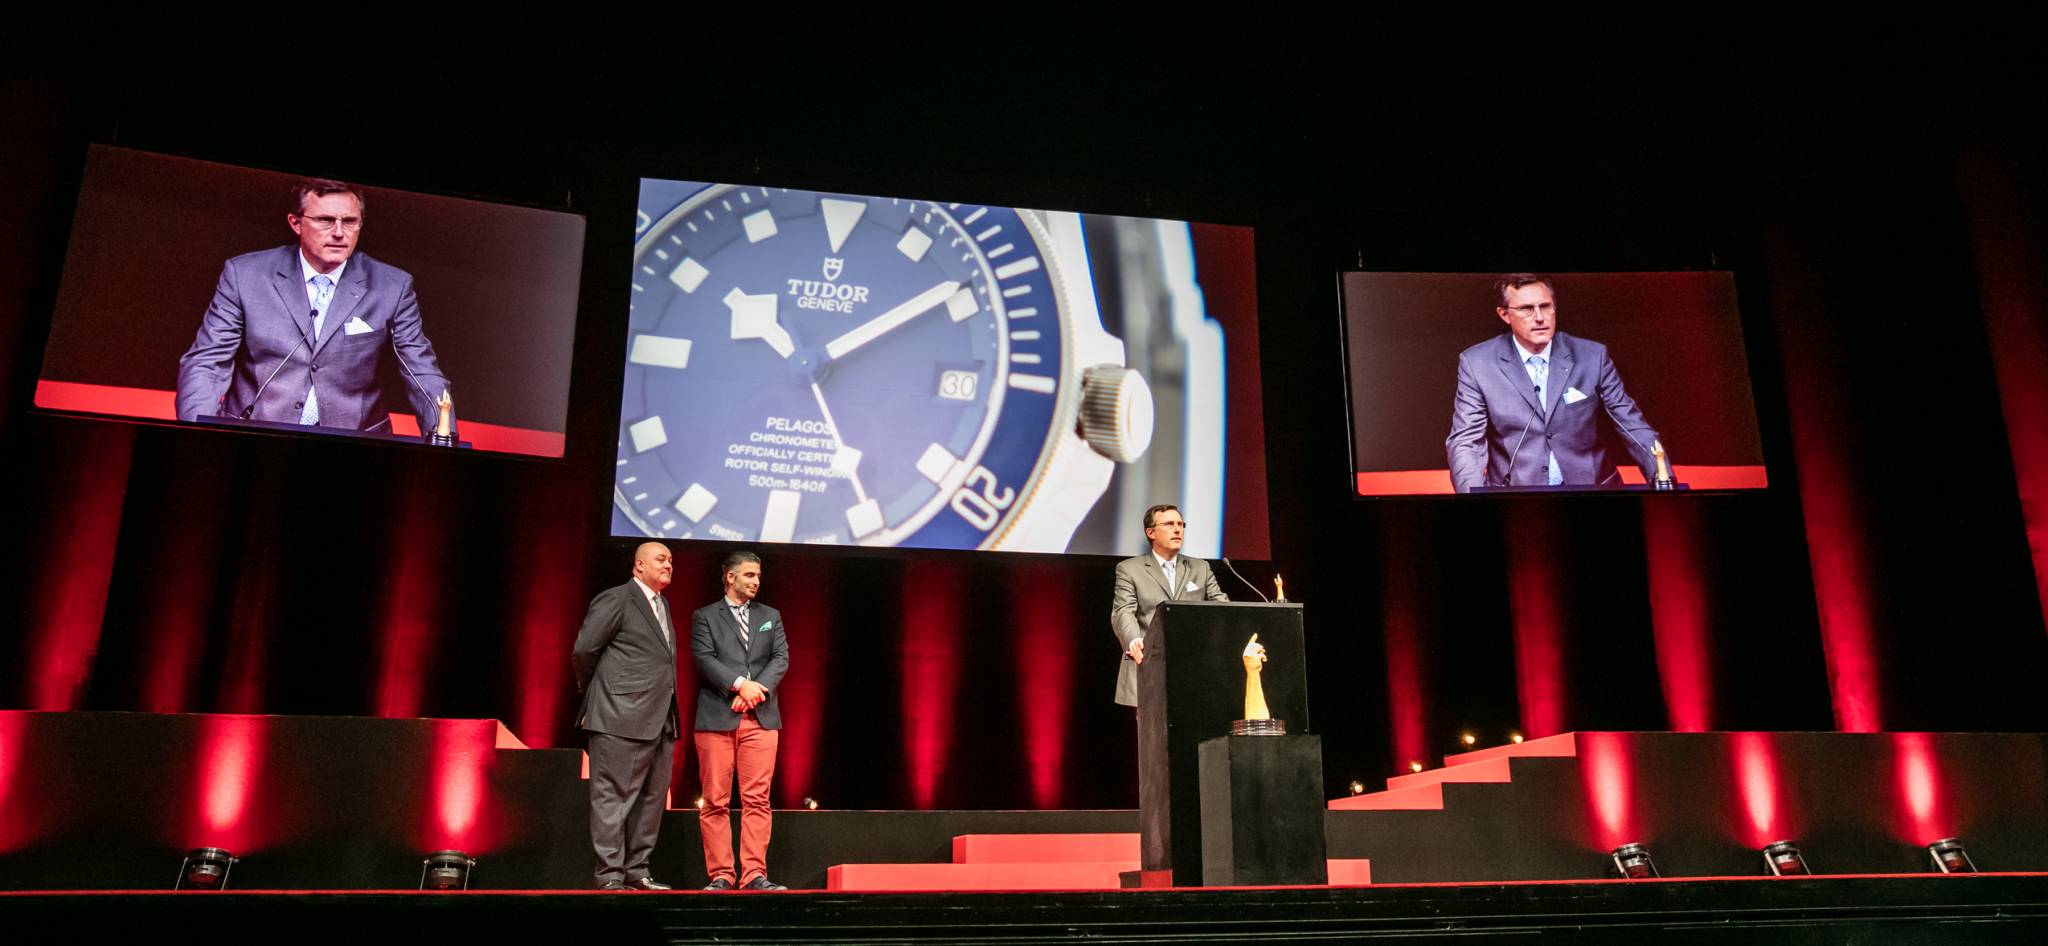 Philippe Peverelli (CEO of Tudor, winner of the Sport Watch Prize 2015) with William Rohr and David Sadigh (jury members)